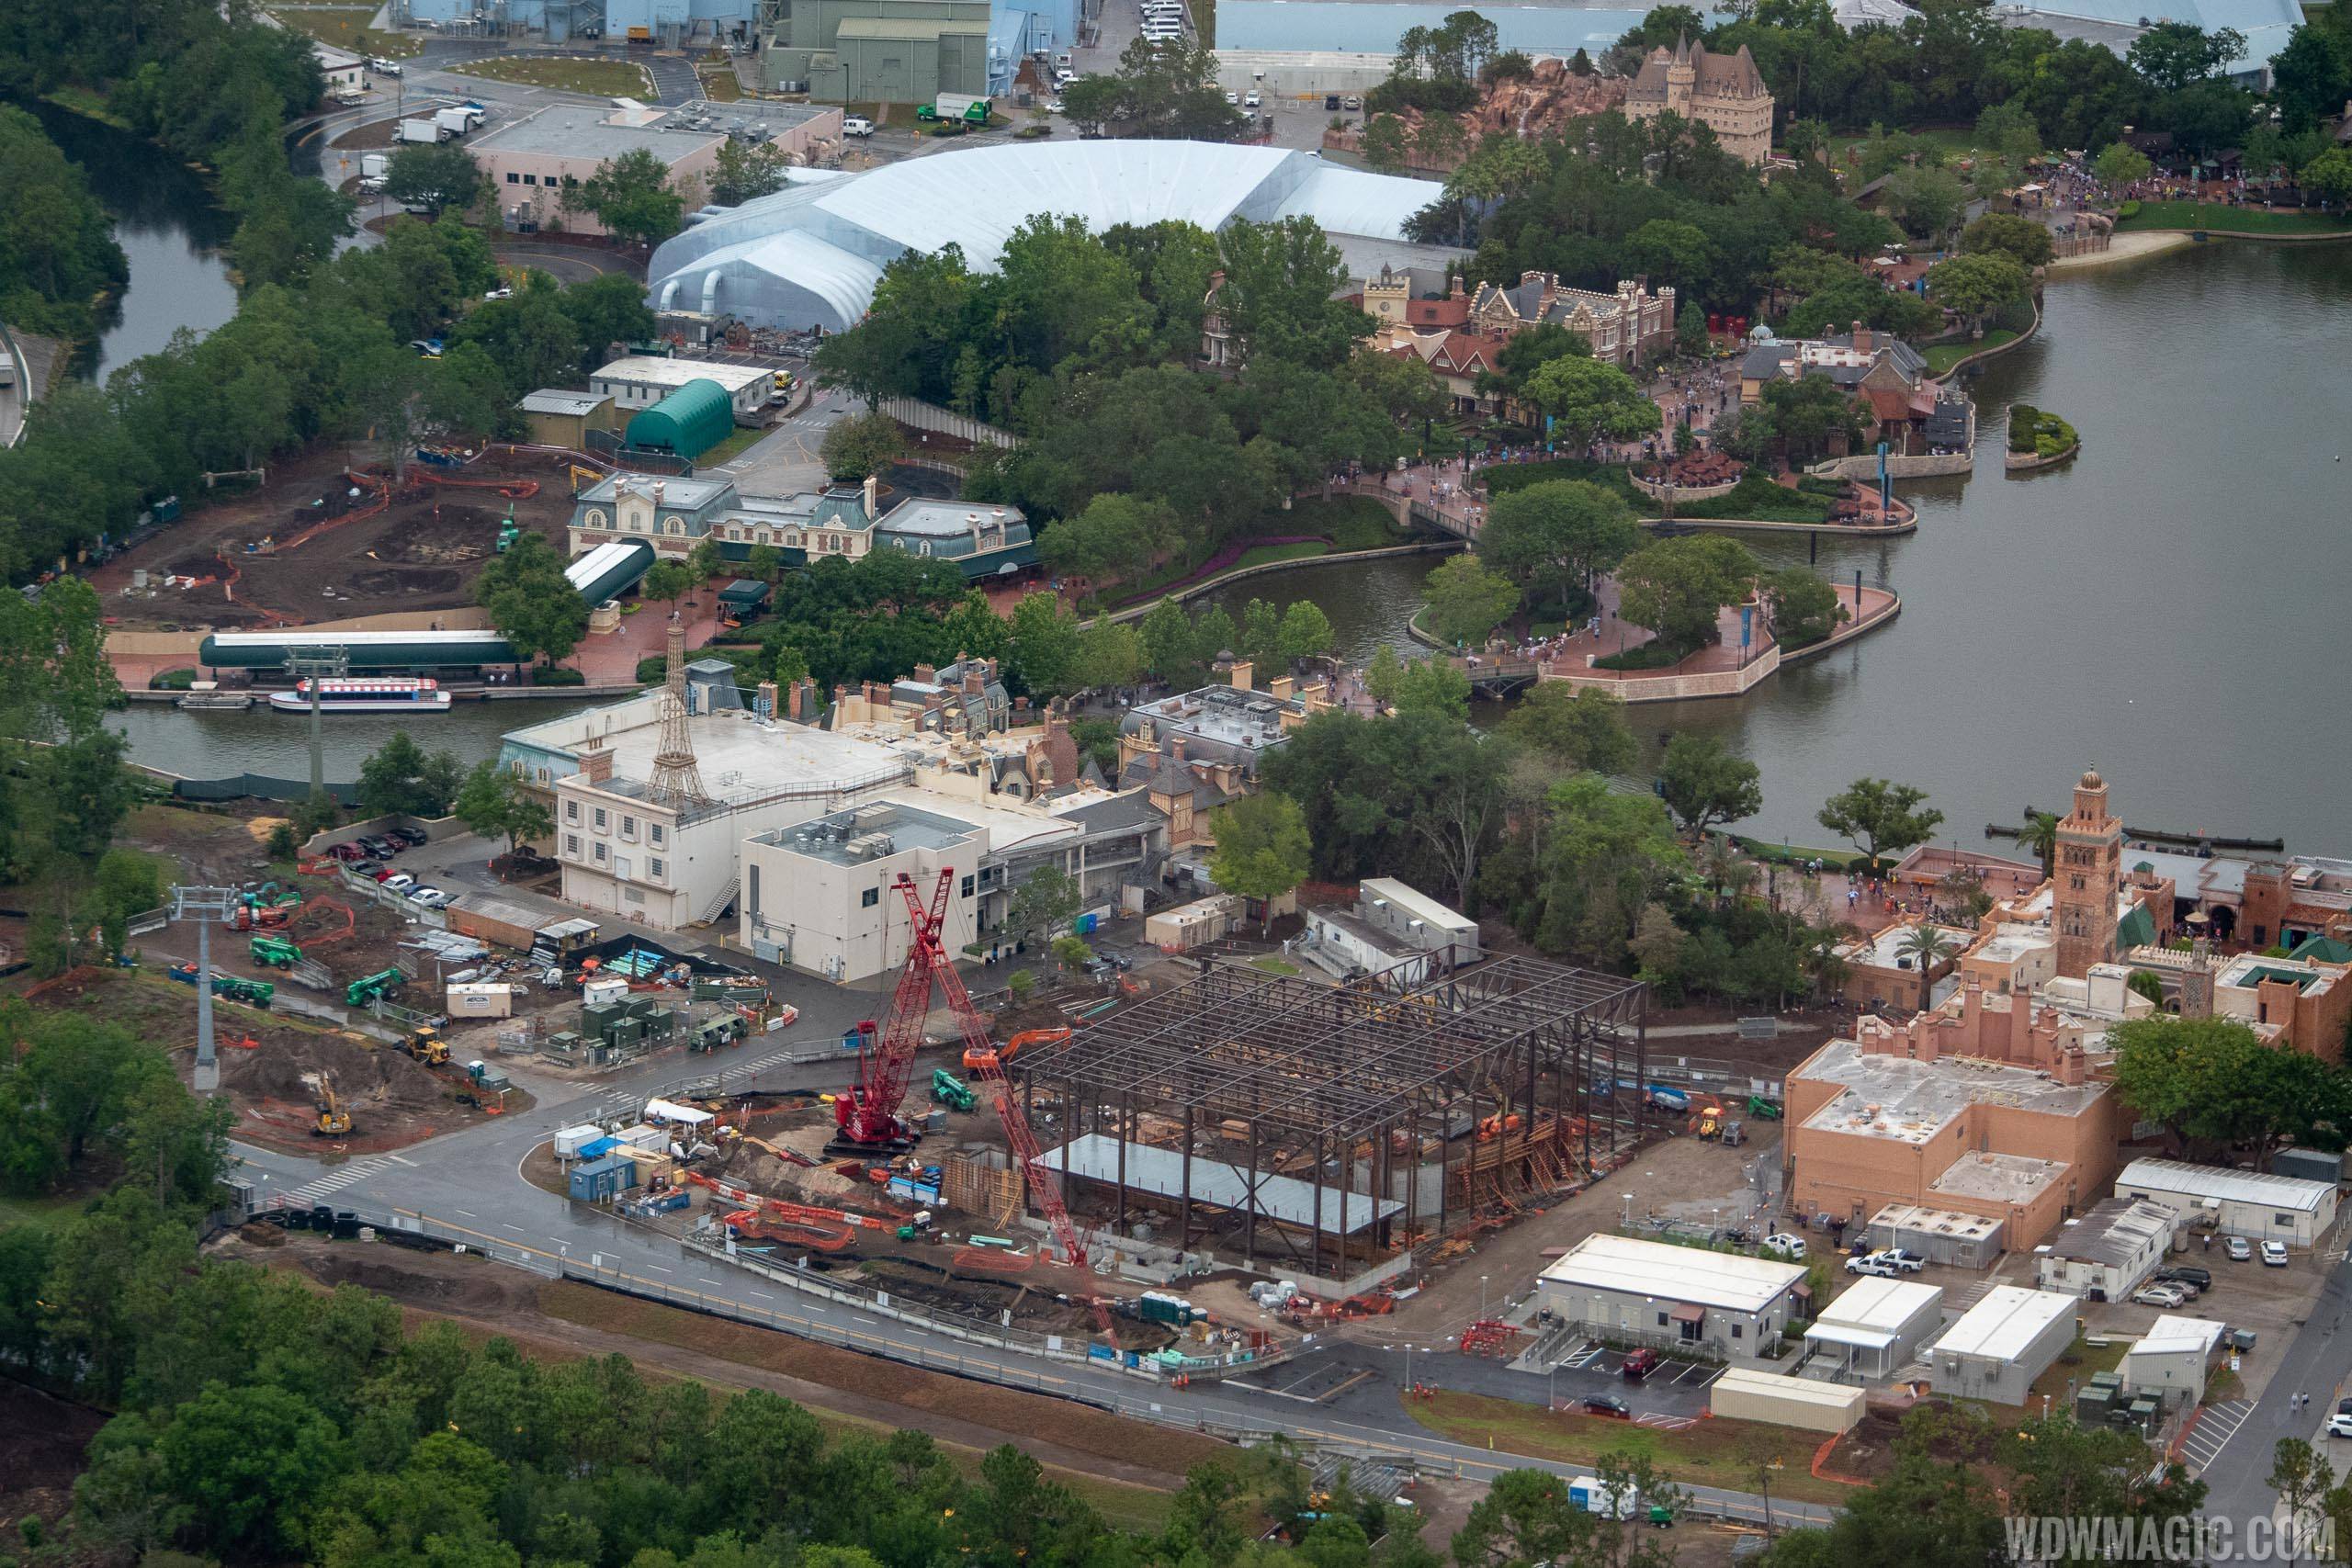 Ratatouille aerial construction pictures - May 2018